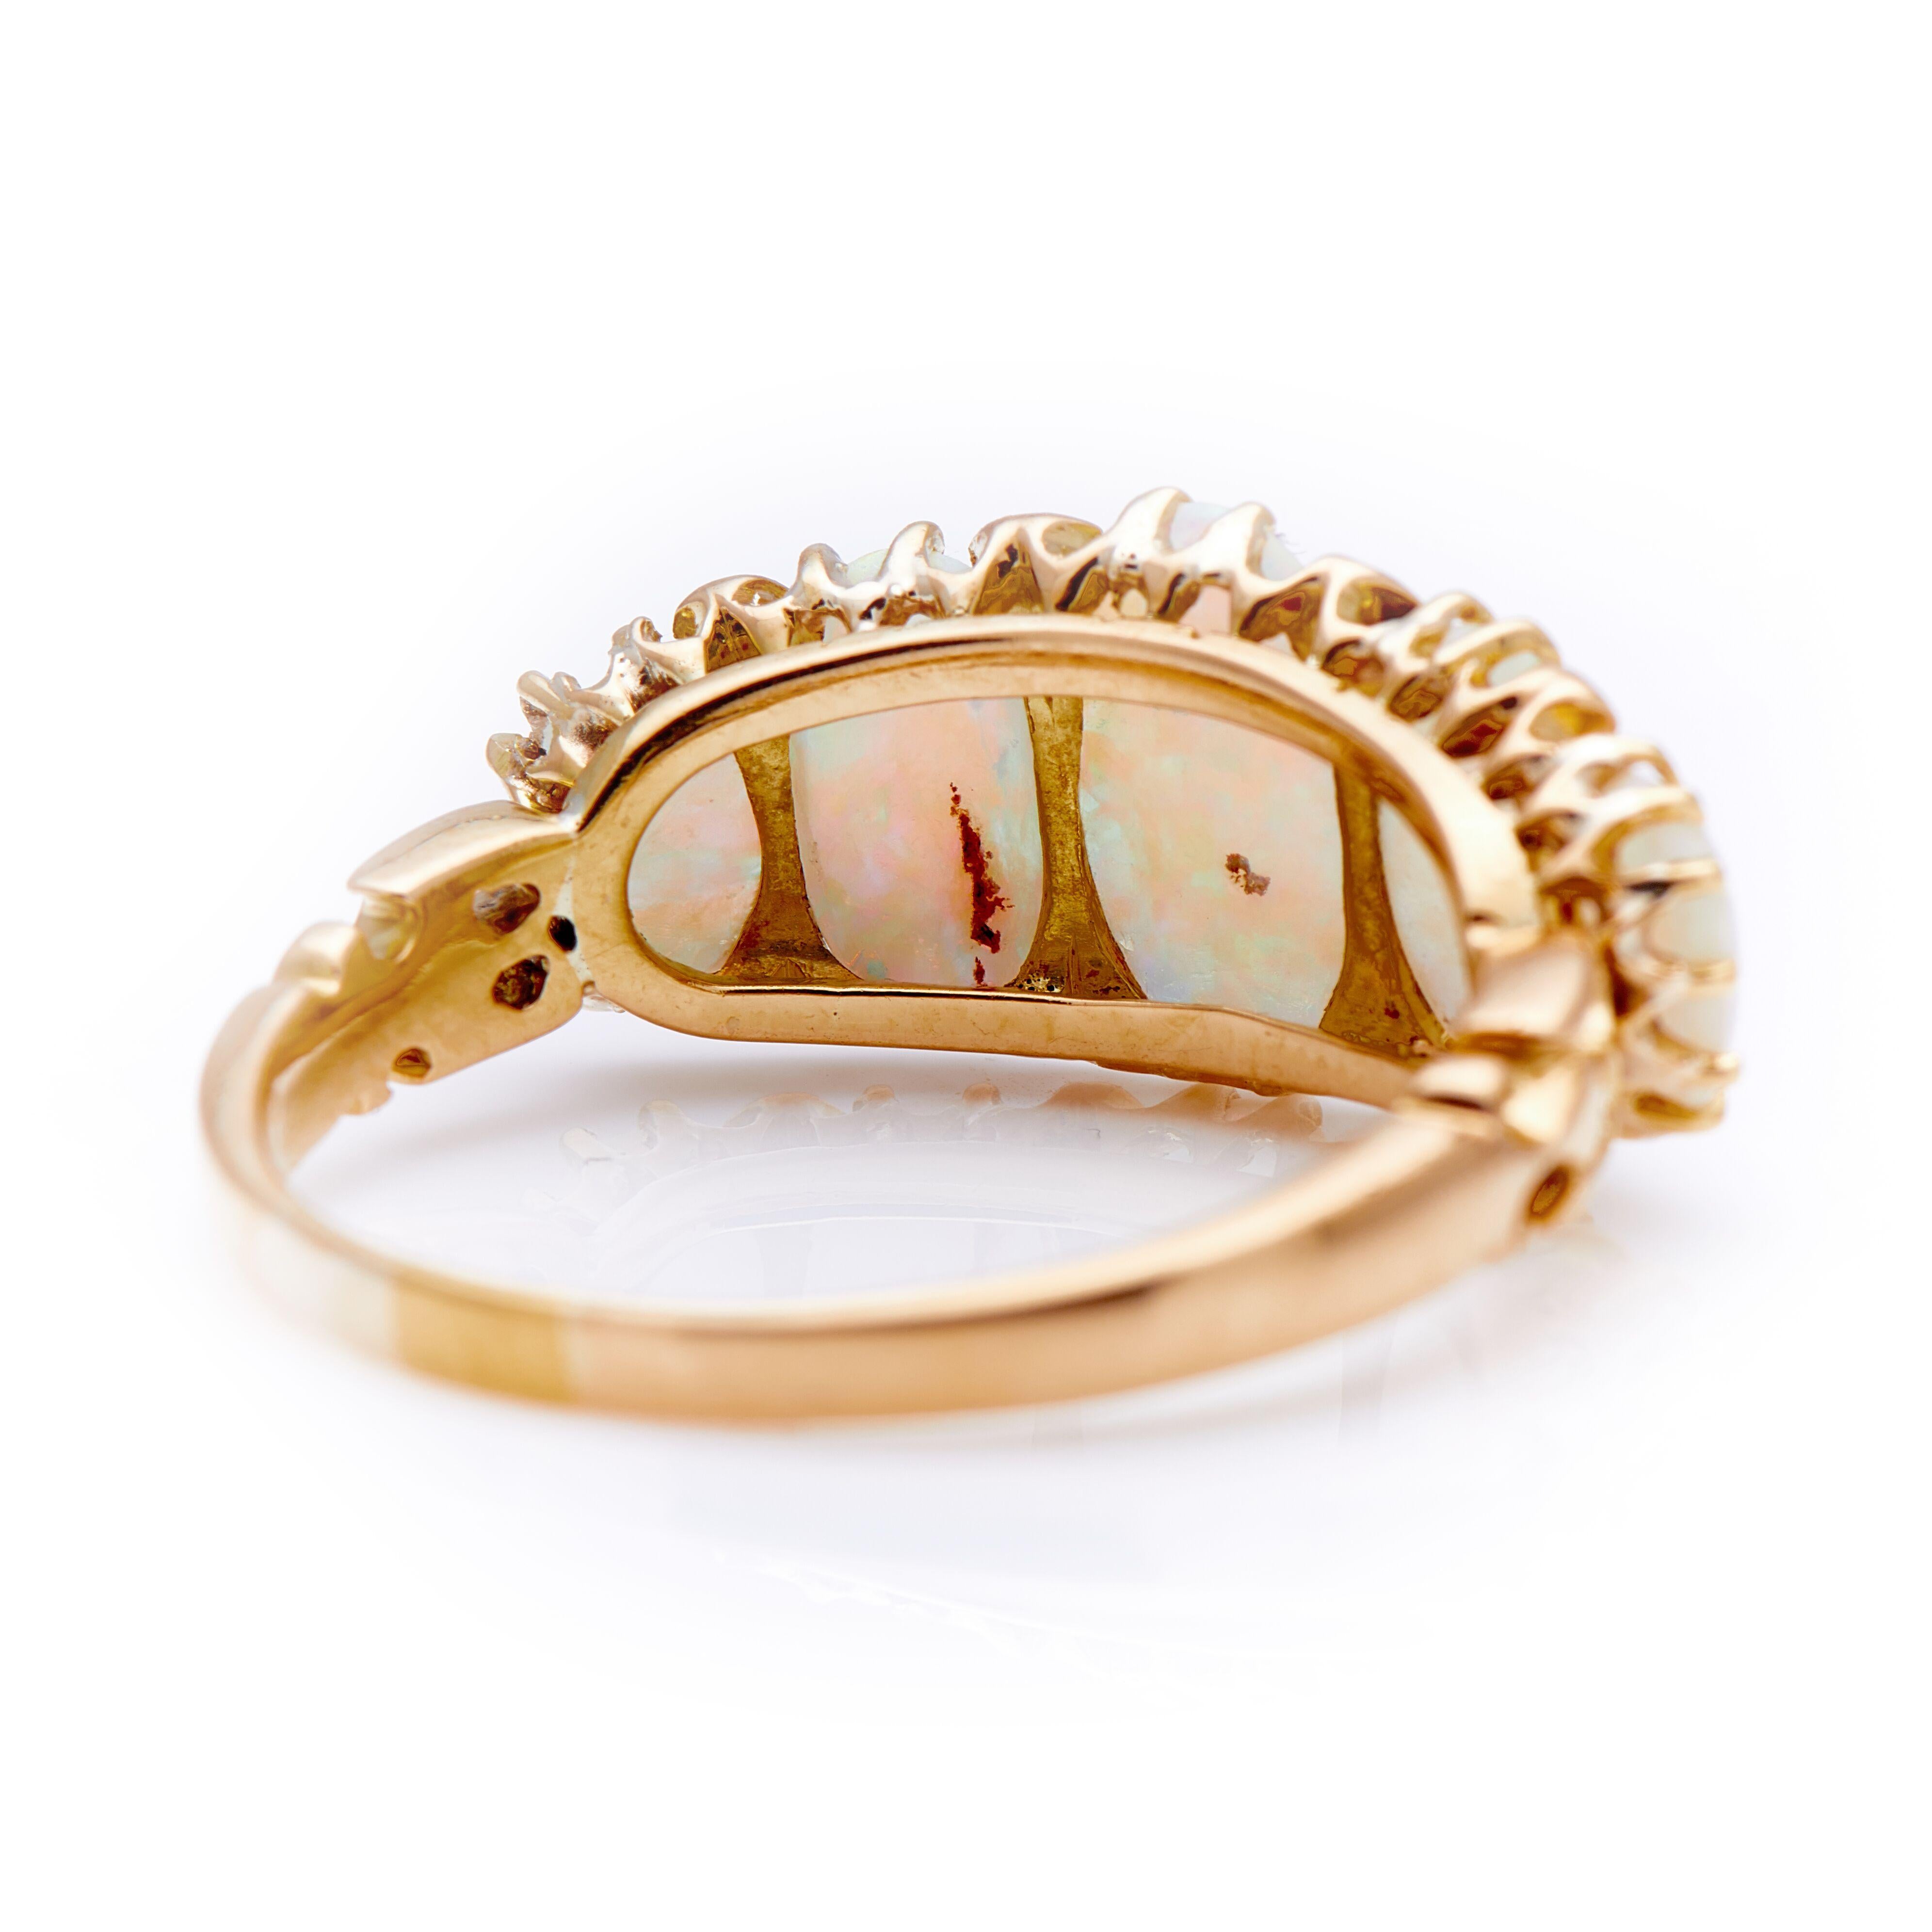 Victorian, opal and diamond half hoop ring, circa 1880. Set with five graduating opals displaying an intense palette of alluring colours resembling a texture of a painting. Each natural opal is interspersed with tiny diamond points to add a touch of